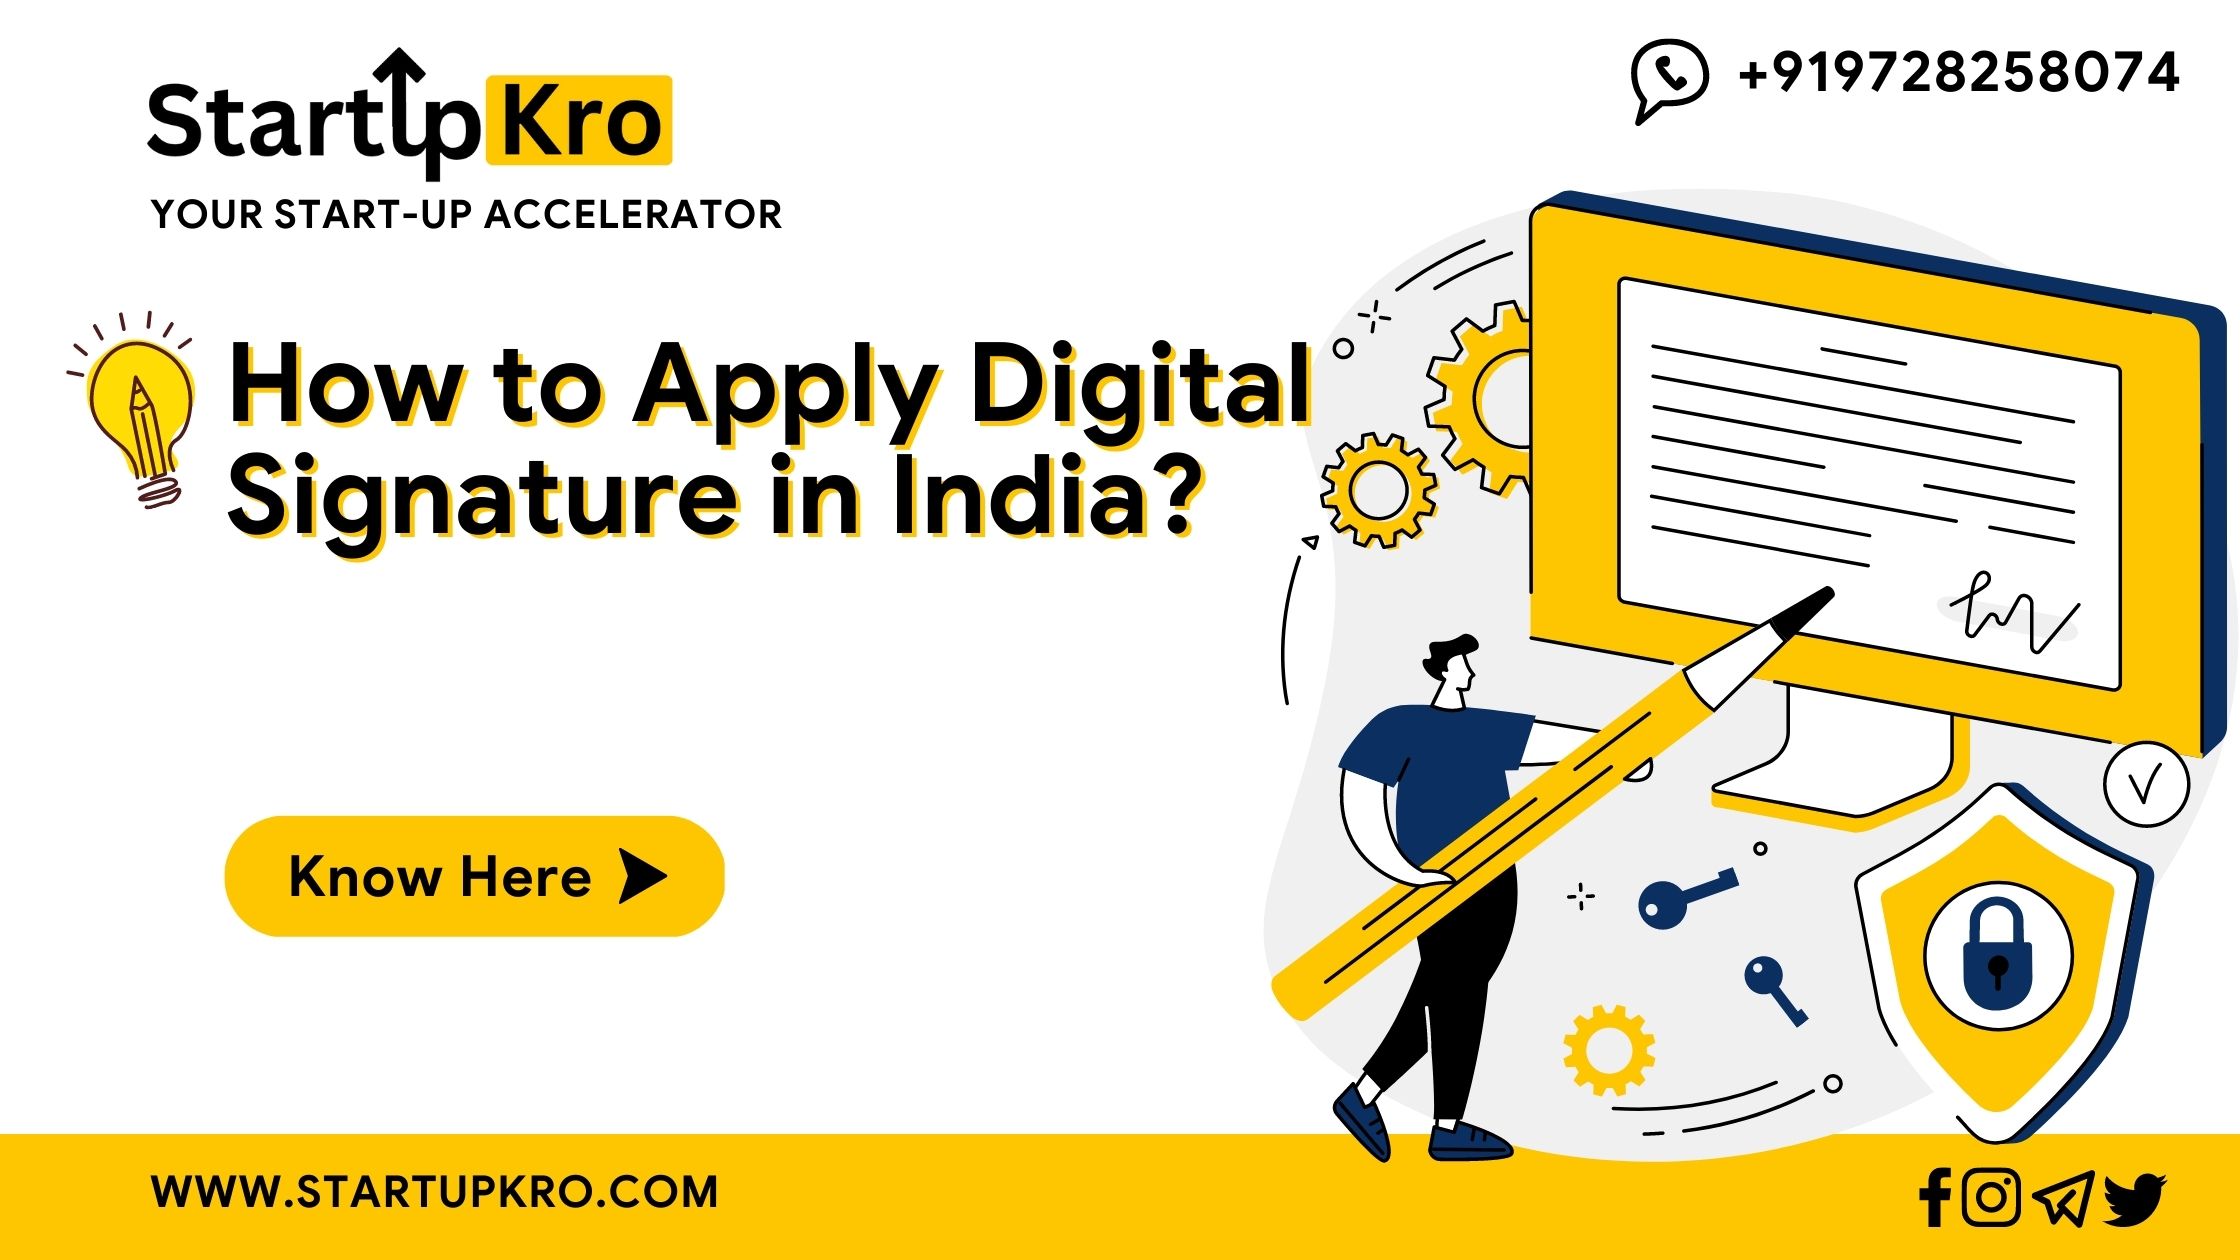 How to Apply Digital Signature in India?